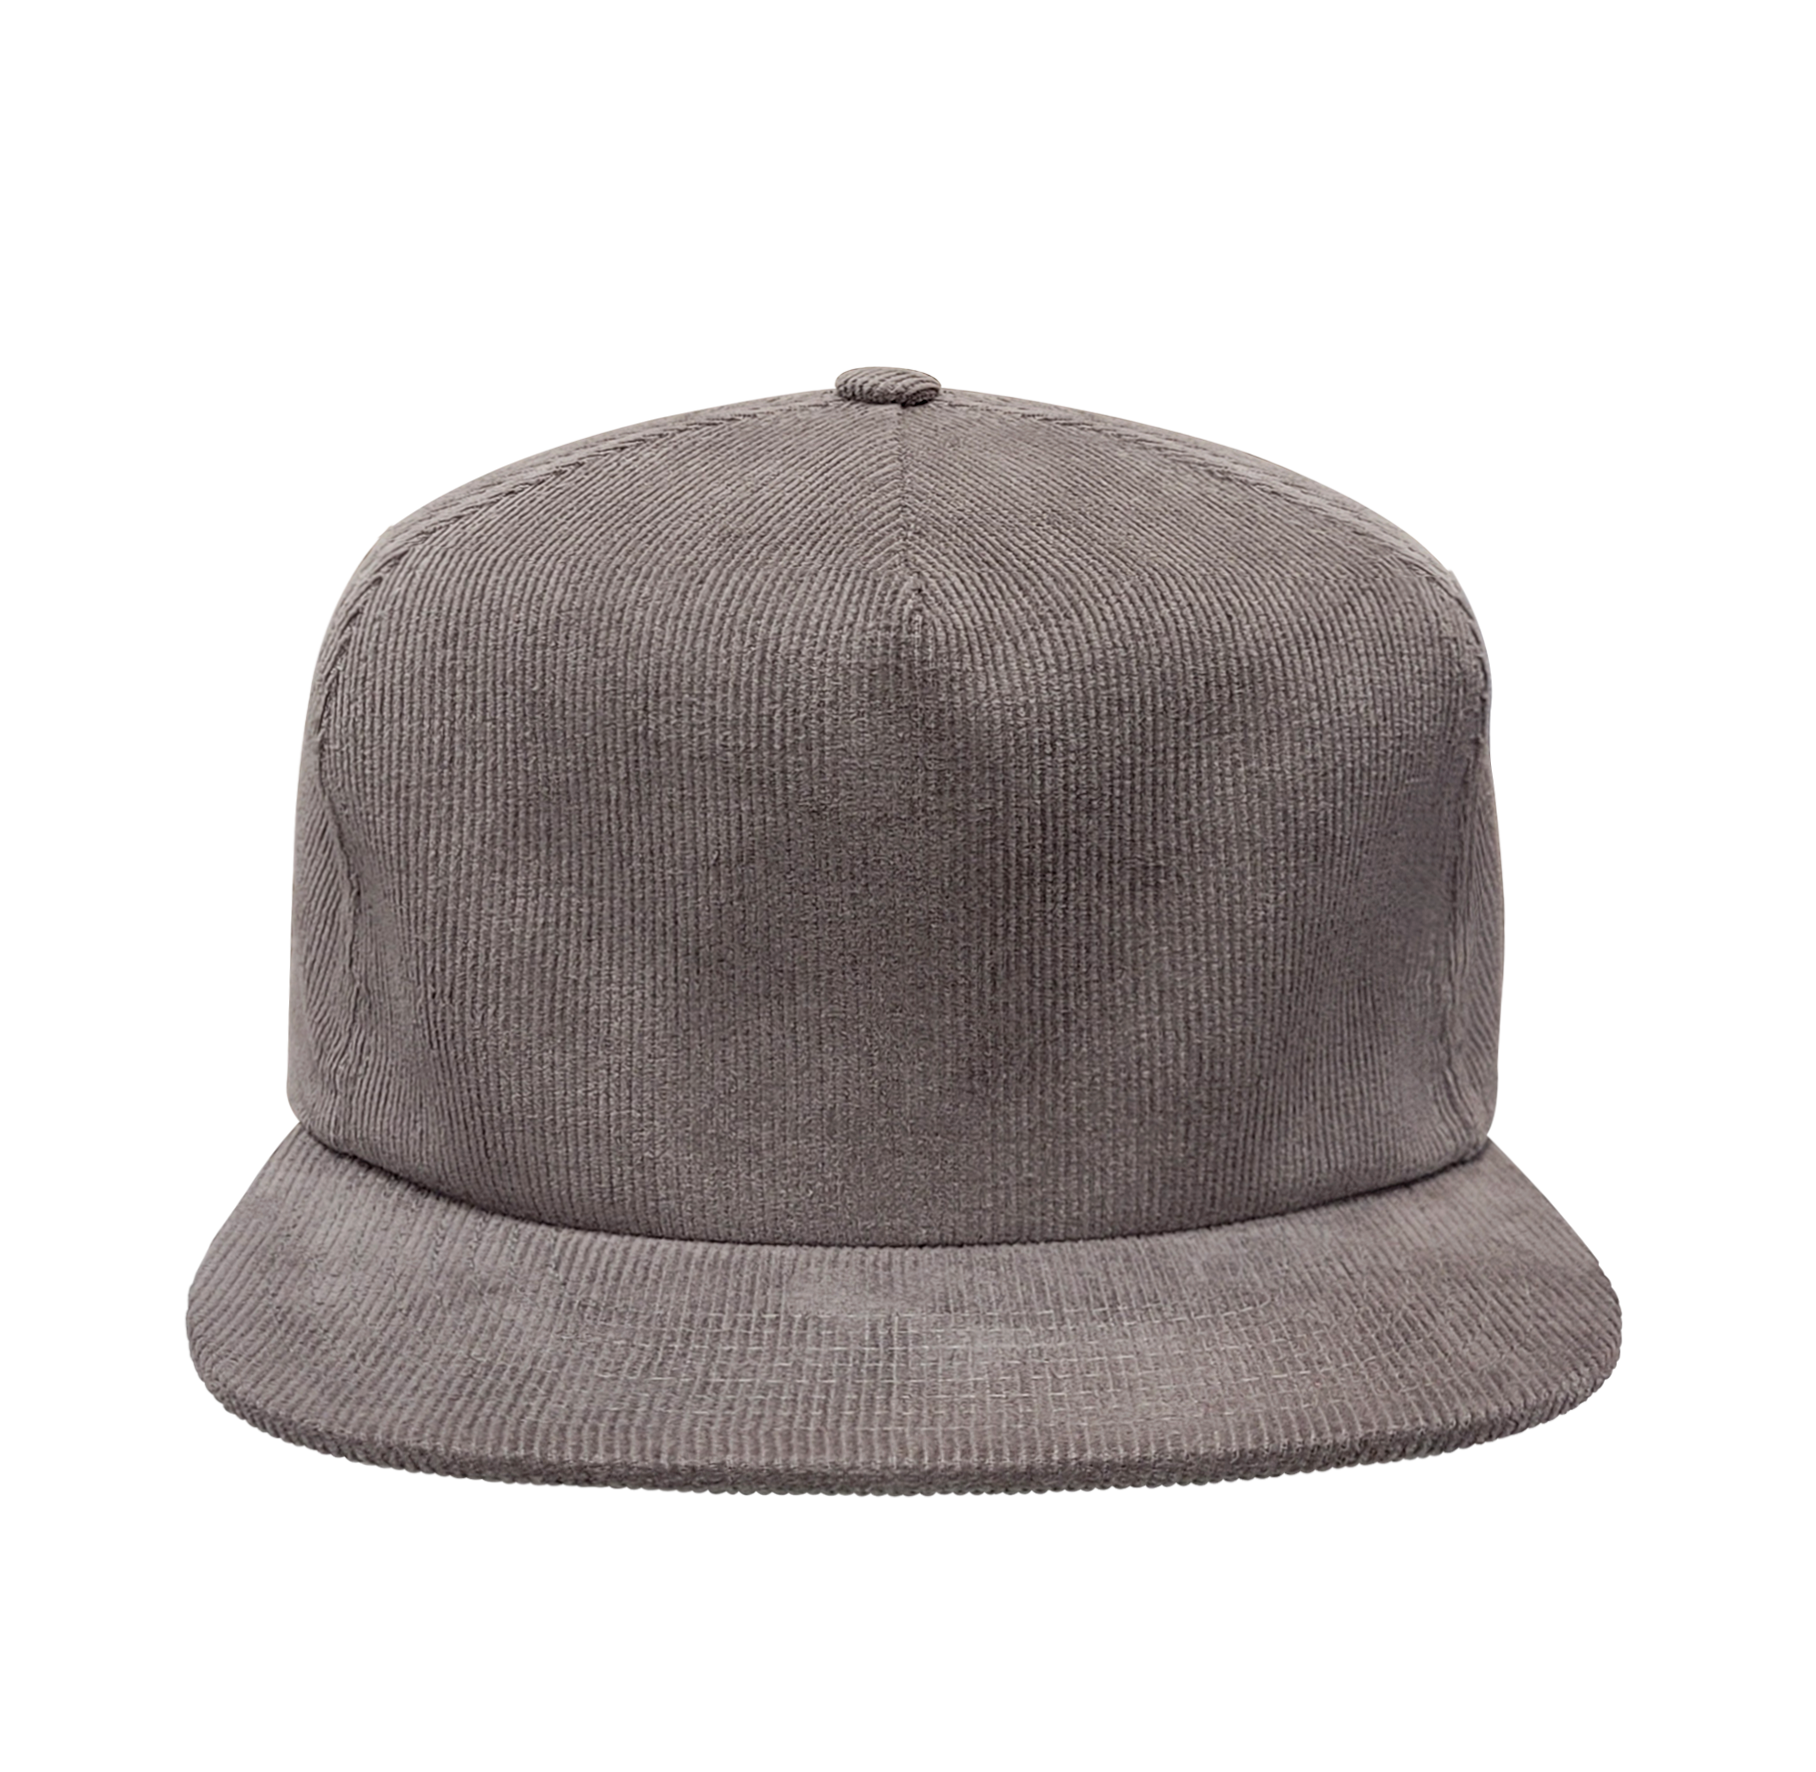 Corduroy 5 Panel Docker Corduroy Hat Bonnet With Rolled Cuff And